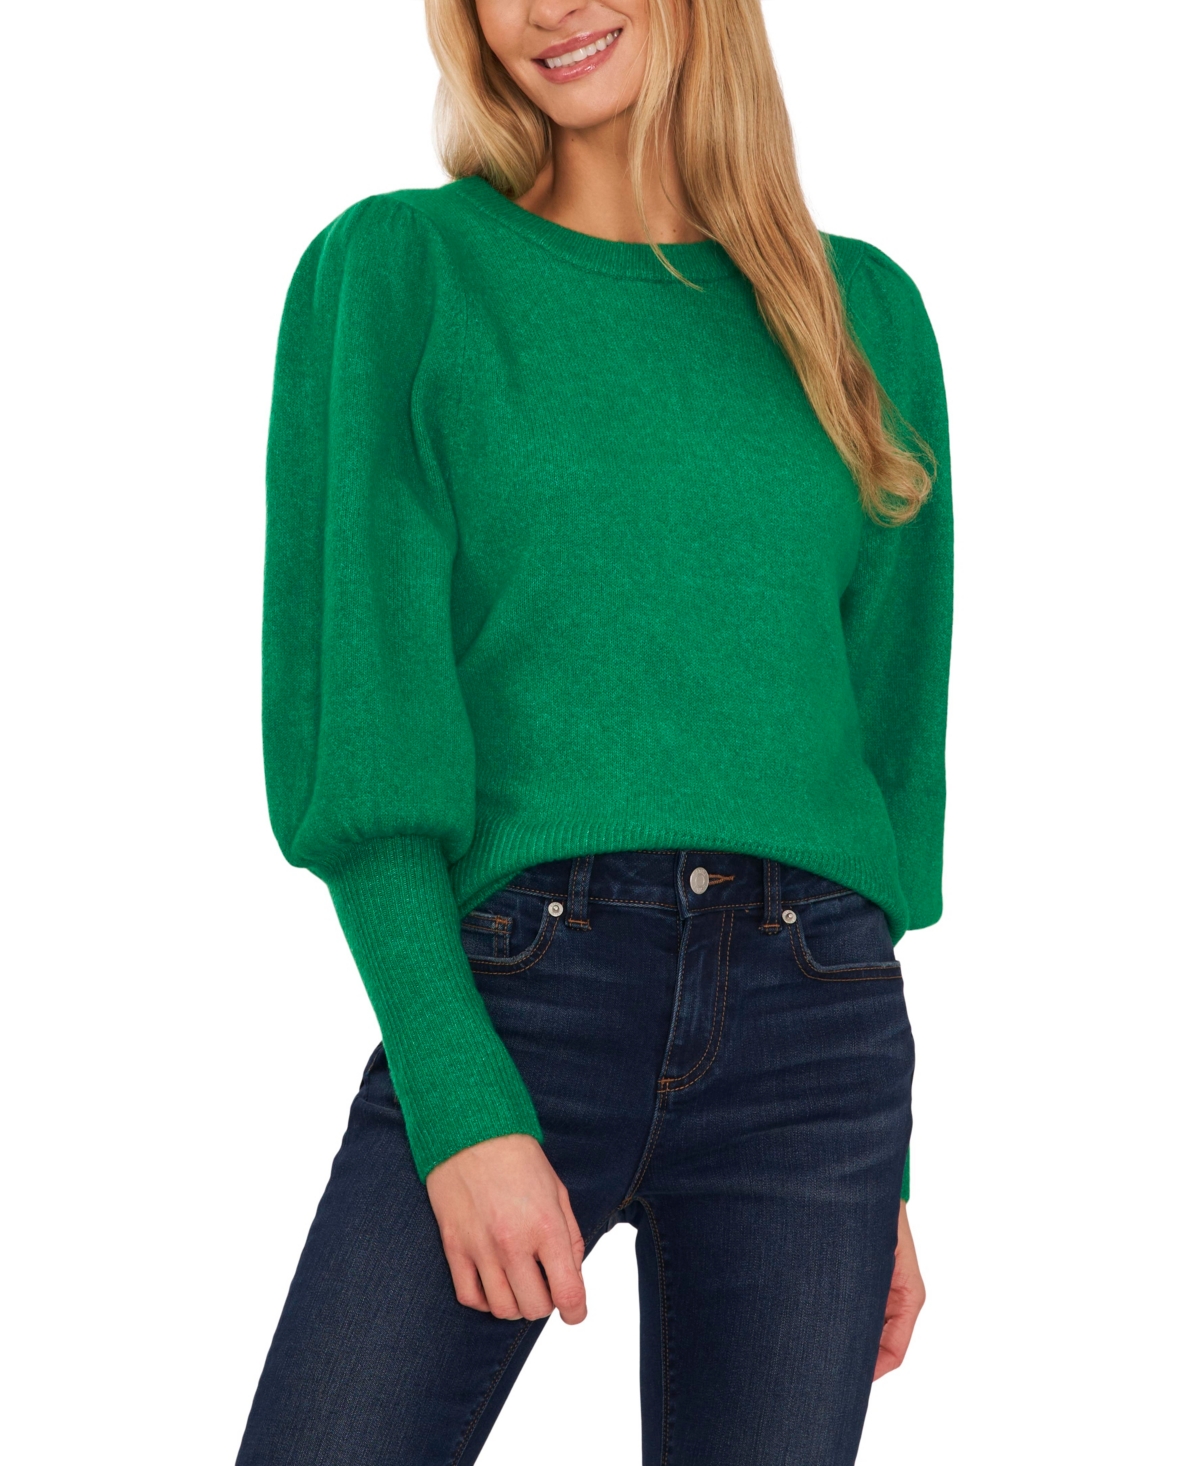 Victorian Blouses, Tops, Shirts, Vests, Sweaters CeCe Womens Puff Long Sleeve Crew Neck Sweater - Electric Green $34.50 AT vintagedancer.com